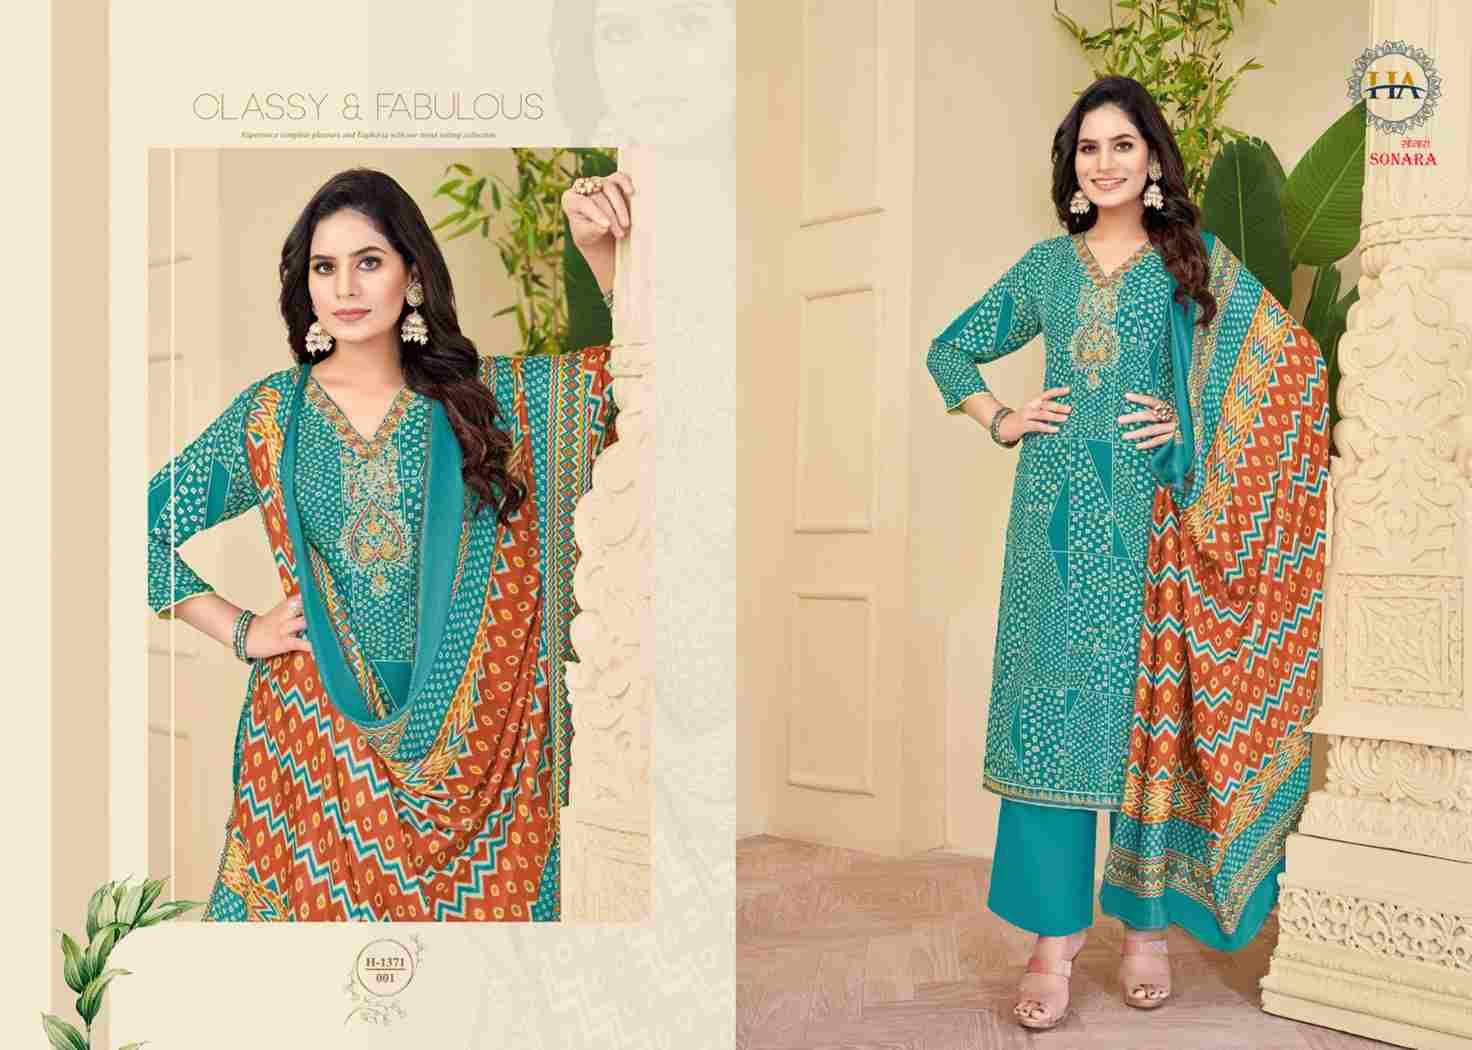 Sonara By Harshit Fashion Hub 1371-001 To 1371-008 Series Beautiful Festive Suits Stylish Fancy Colorful Casual Wear & Ethnic Wear Pure Viscose Rayon Print Dresses At Wholesale Price